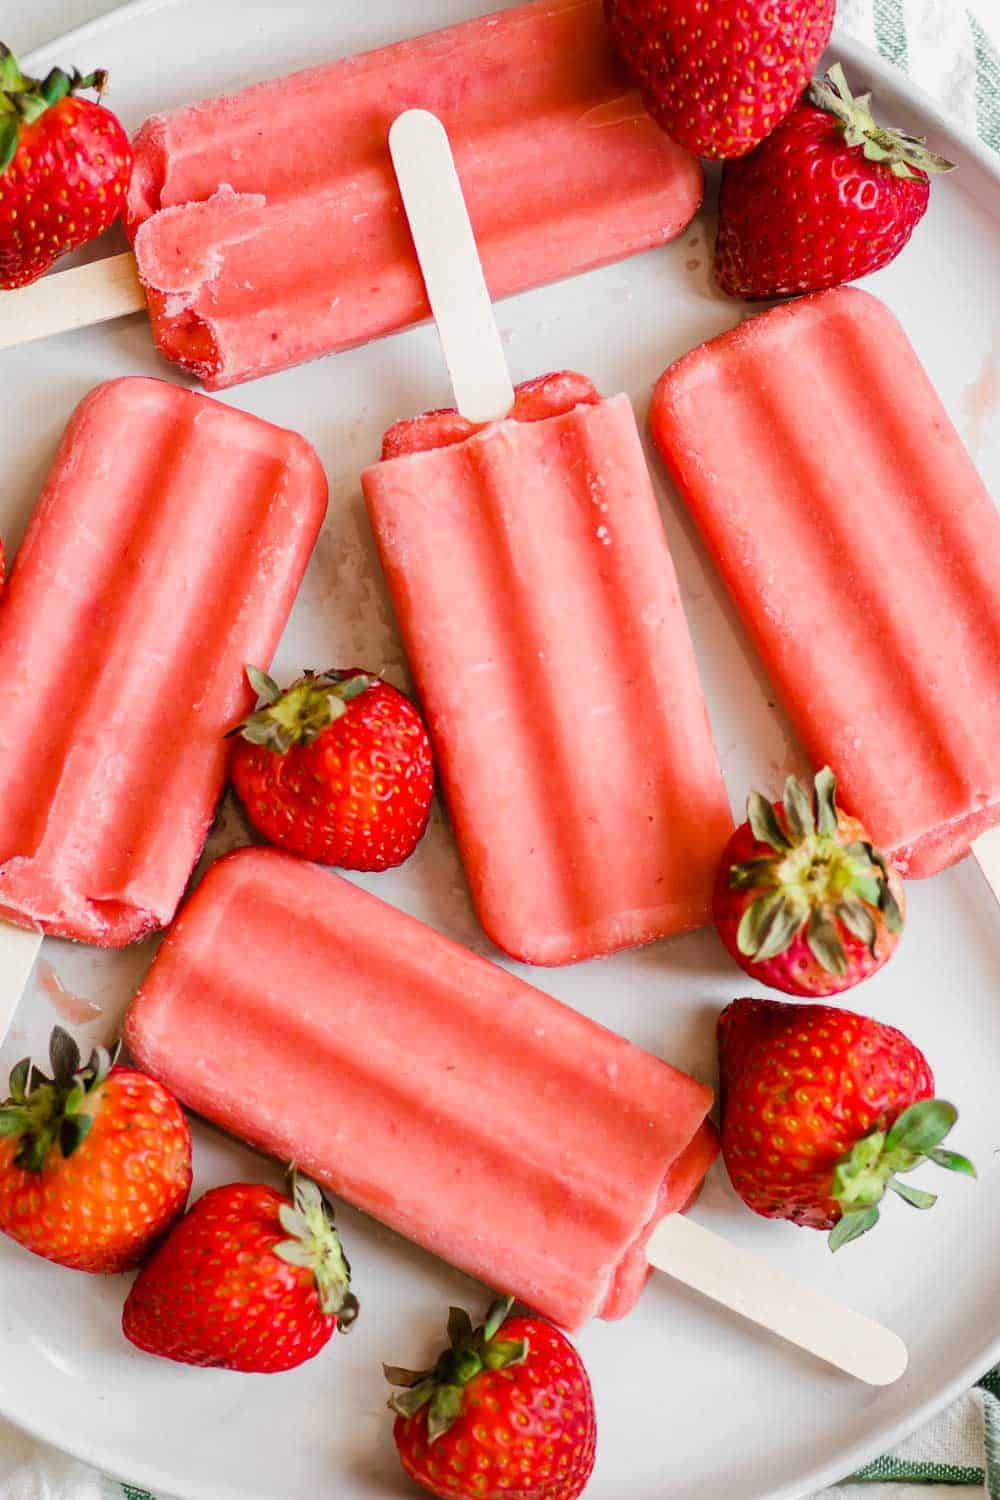 These healthy strawberry popsicles (vegan, paleo) contain only four ingredients and are incredible easy to make with only 5 minutes of prep! || The Butter Half #popsiclerecipe #healthypopsicles #easypopsicles #strawberrypopsicles #veganrecipes #paleorecipes #thebutterhalf